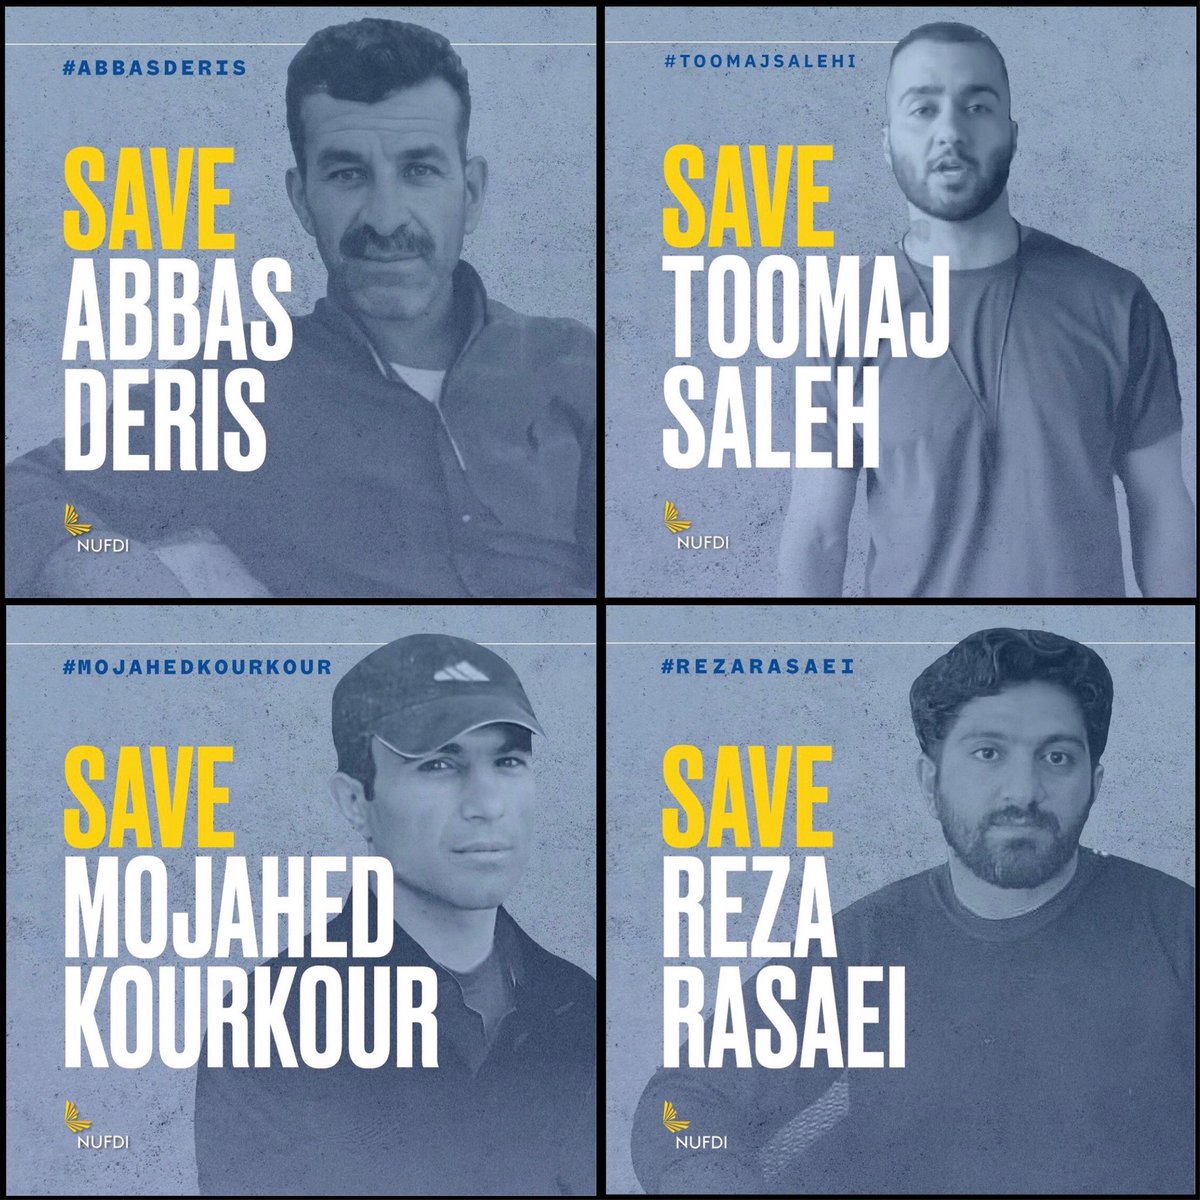 #ToomajSalehi #RezaRasaei #MojahedKourkour #AbbasDeris lives are at imminent risk of execution by the Islamic regime in Iran at any moment!

Be their voice to save their lives!
@JavaidRehman @UN_SPExperts